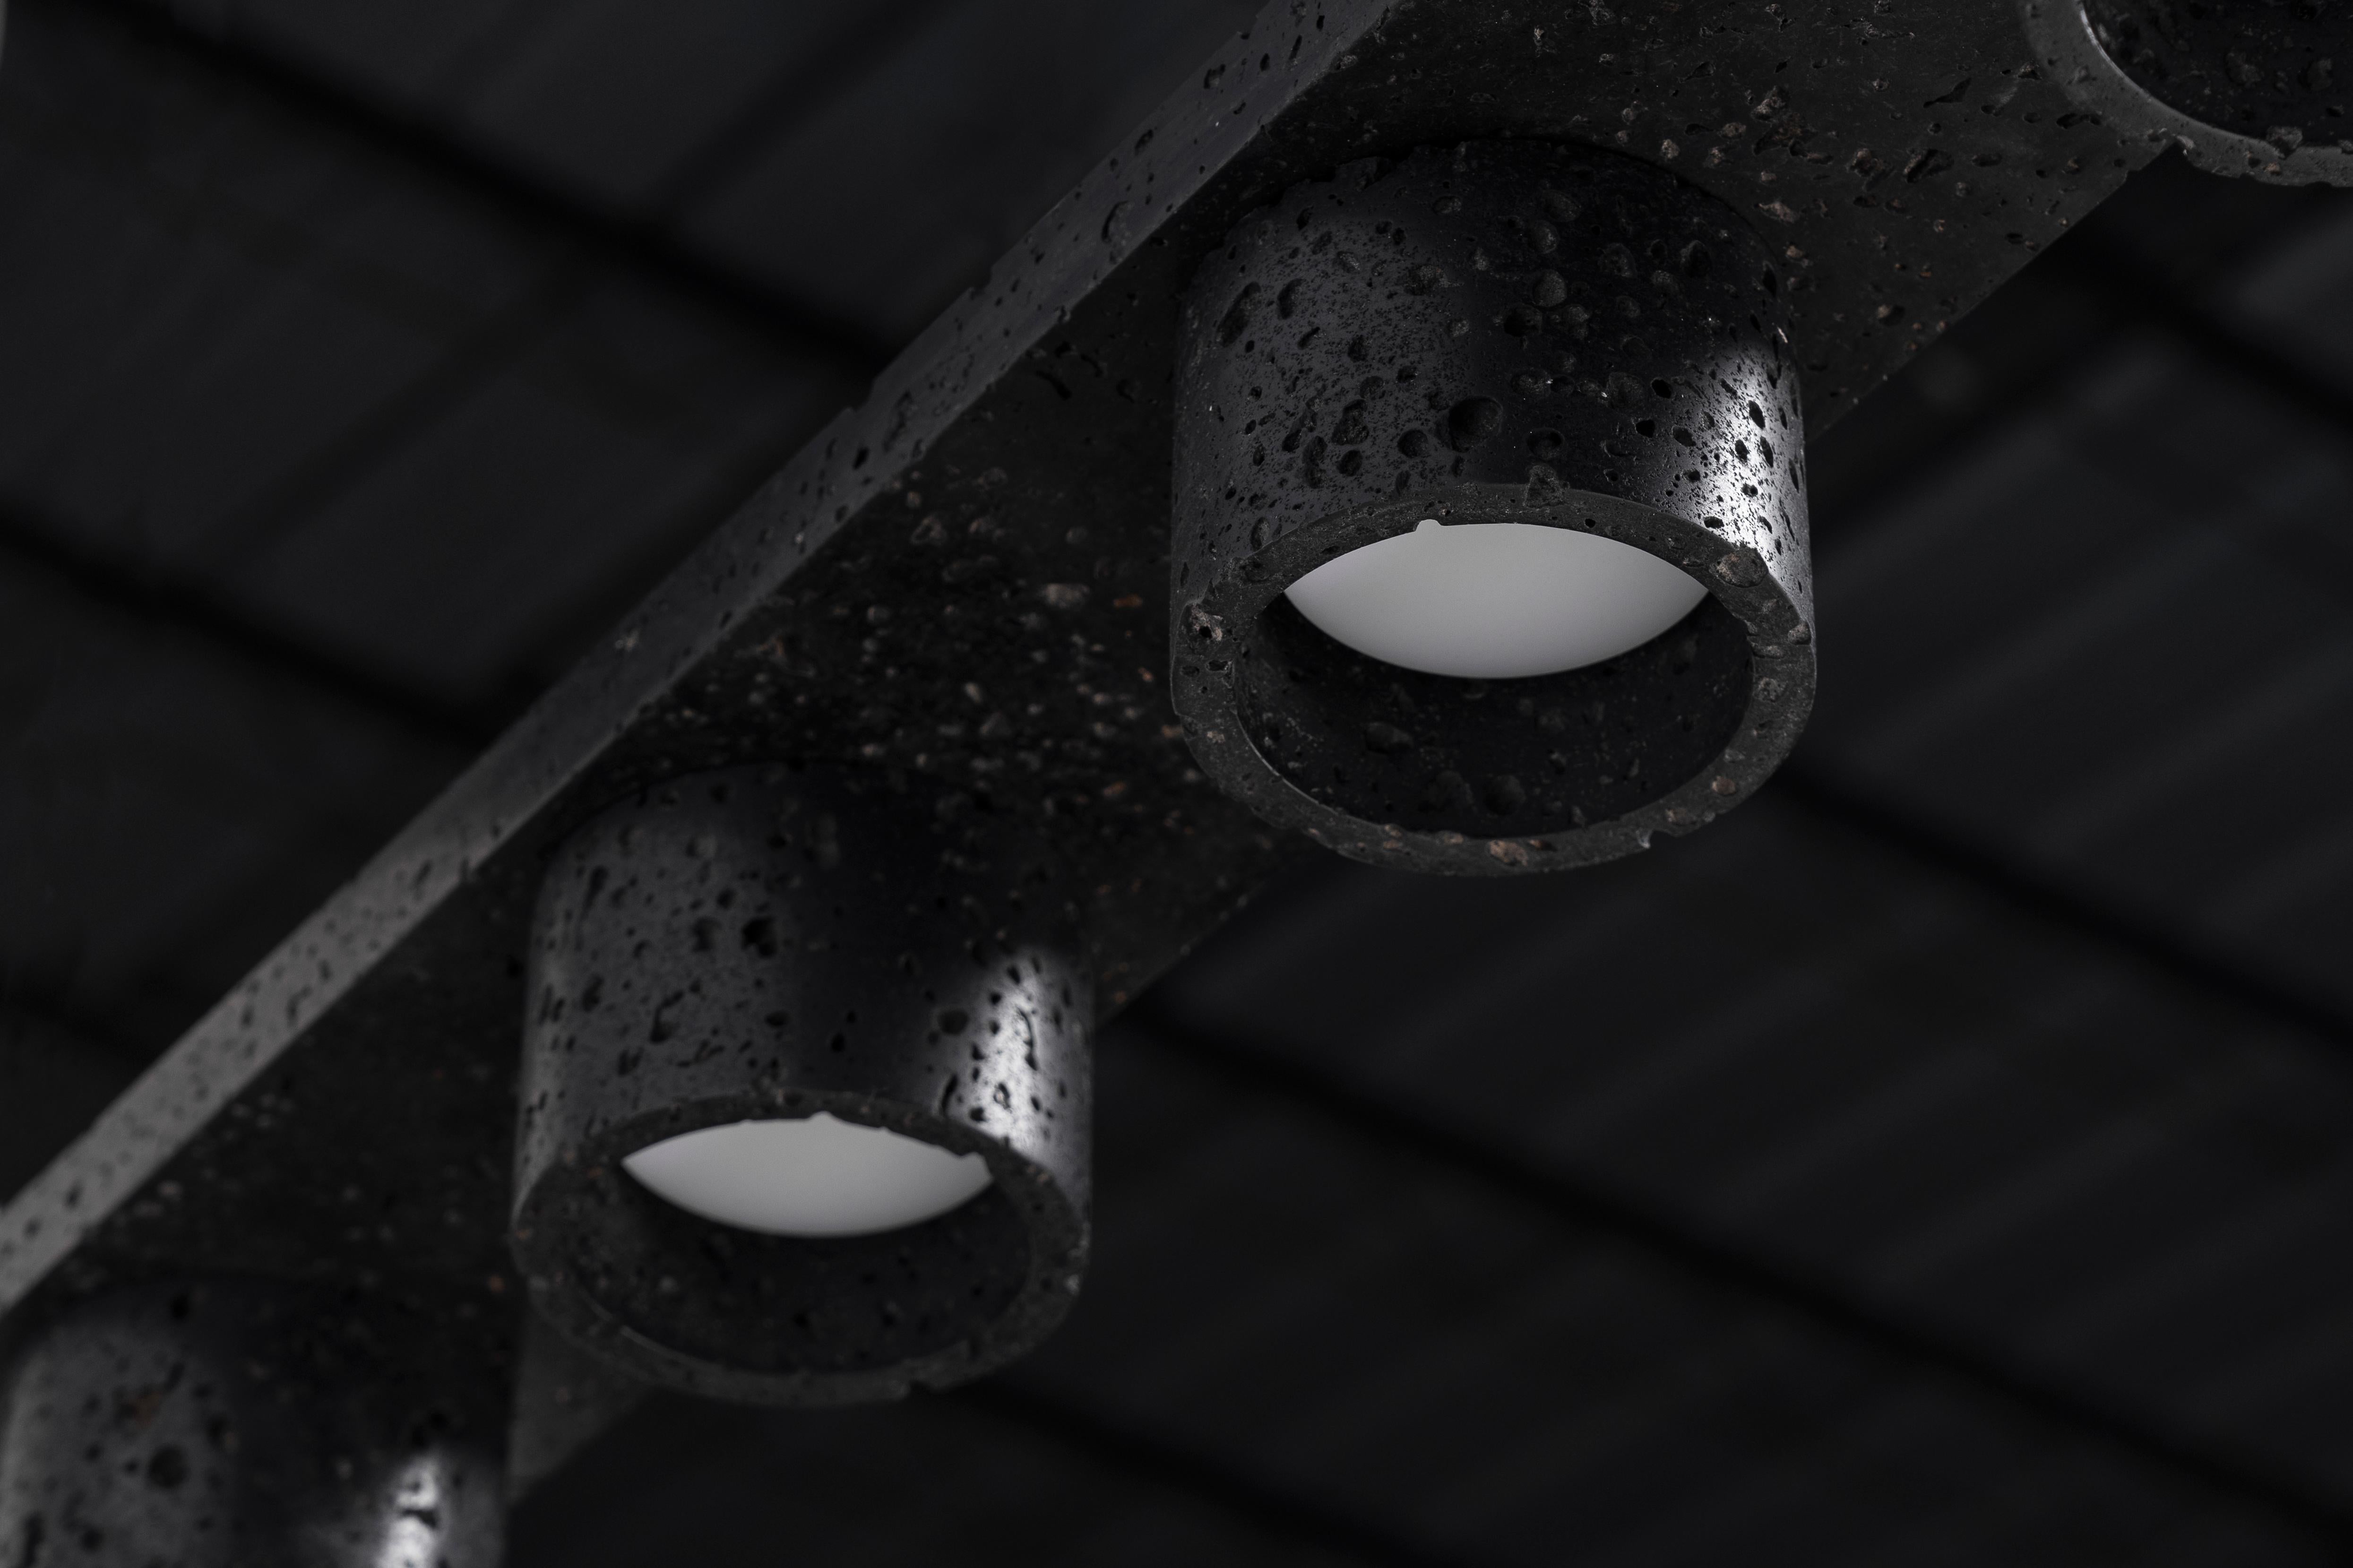 Chinese Lava Stone and Aluminum Pendant Light, “T6, ” by Buzao